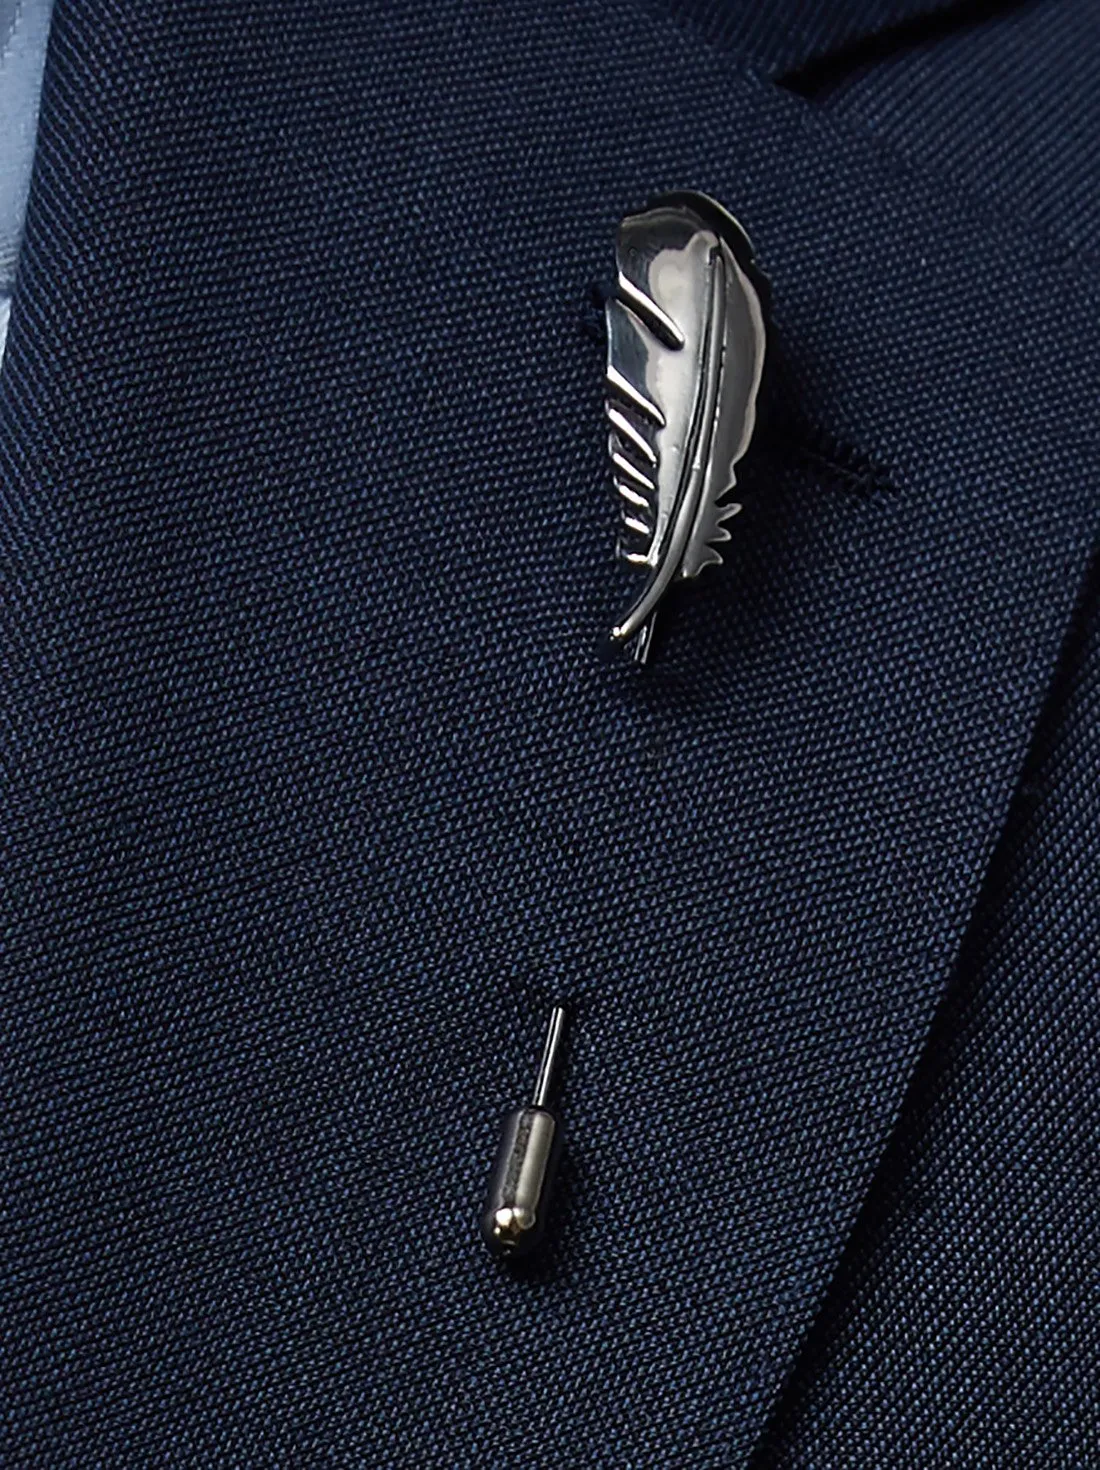 Silver Lapel Pin Feather